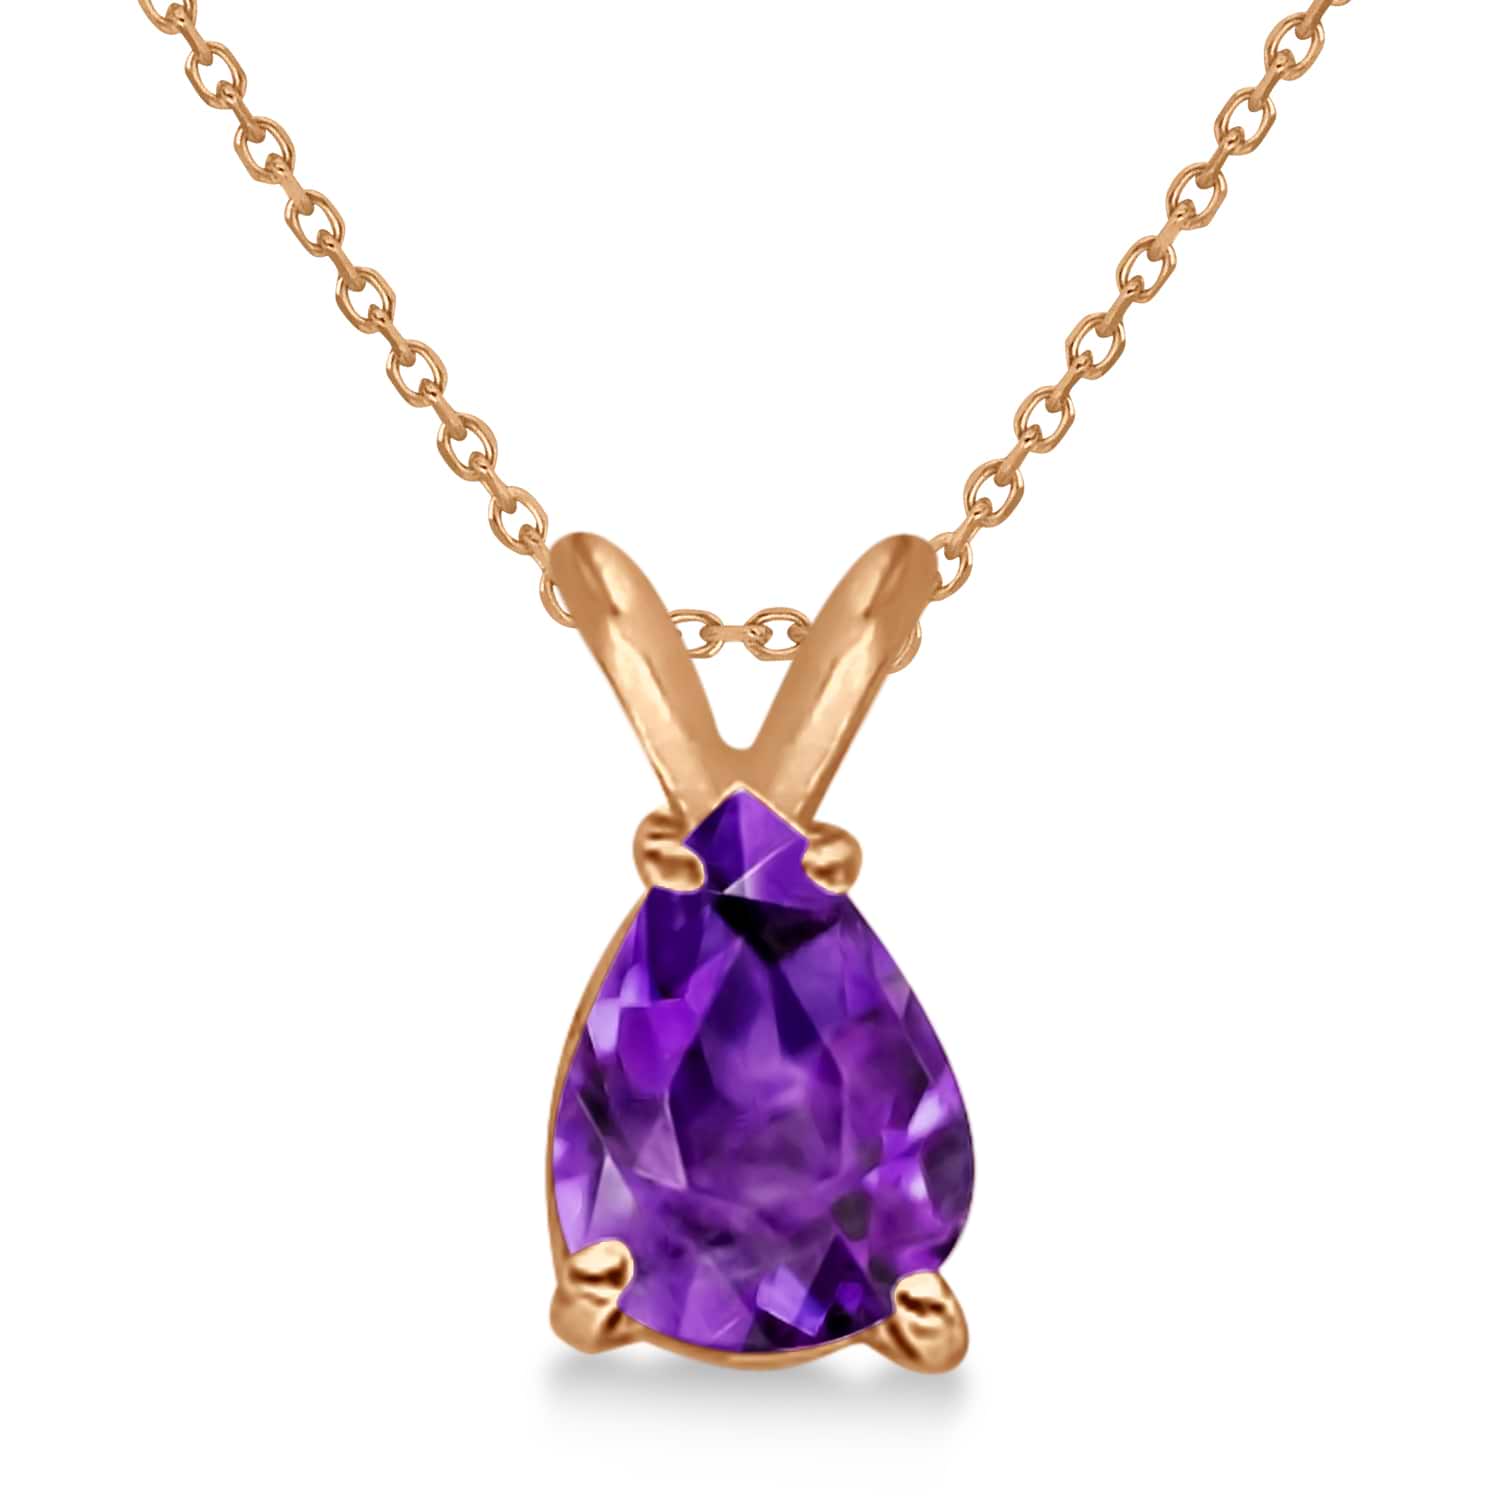 Pear-Cut Amethyst Solitaire Pendant Necklace 14K Rose Gold (1.00ct)